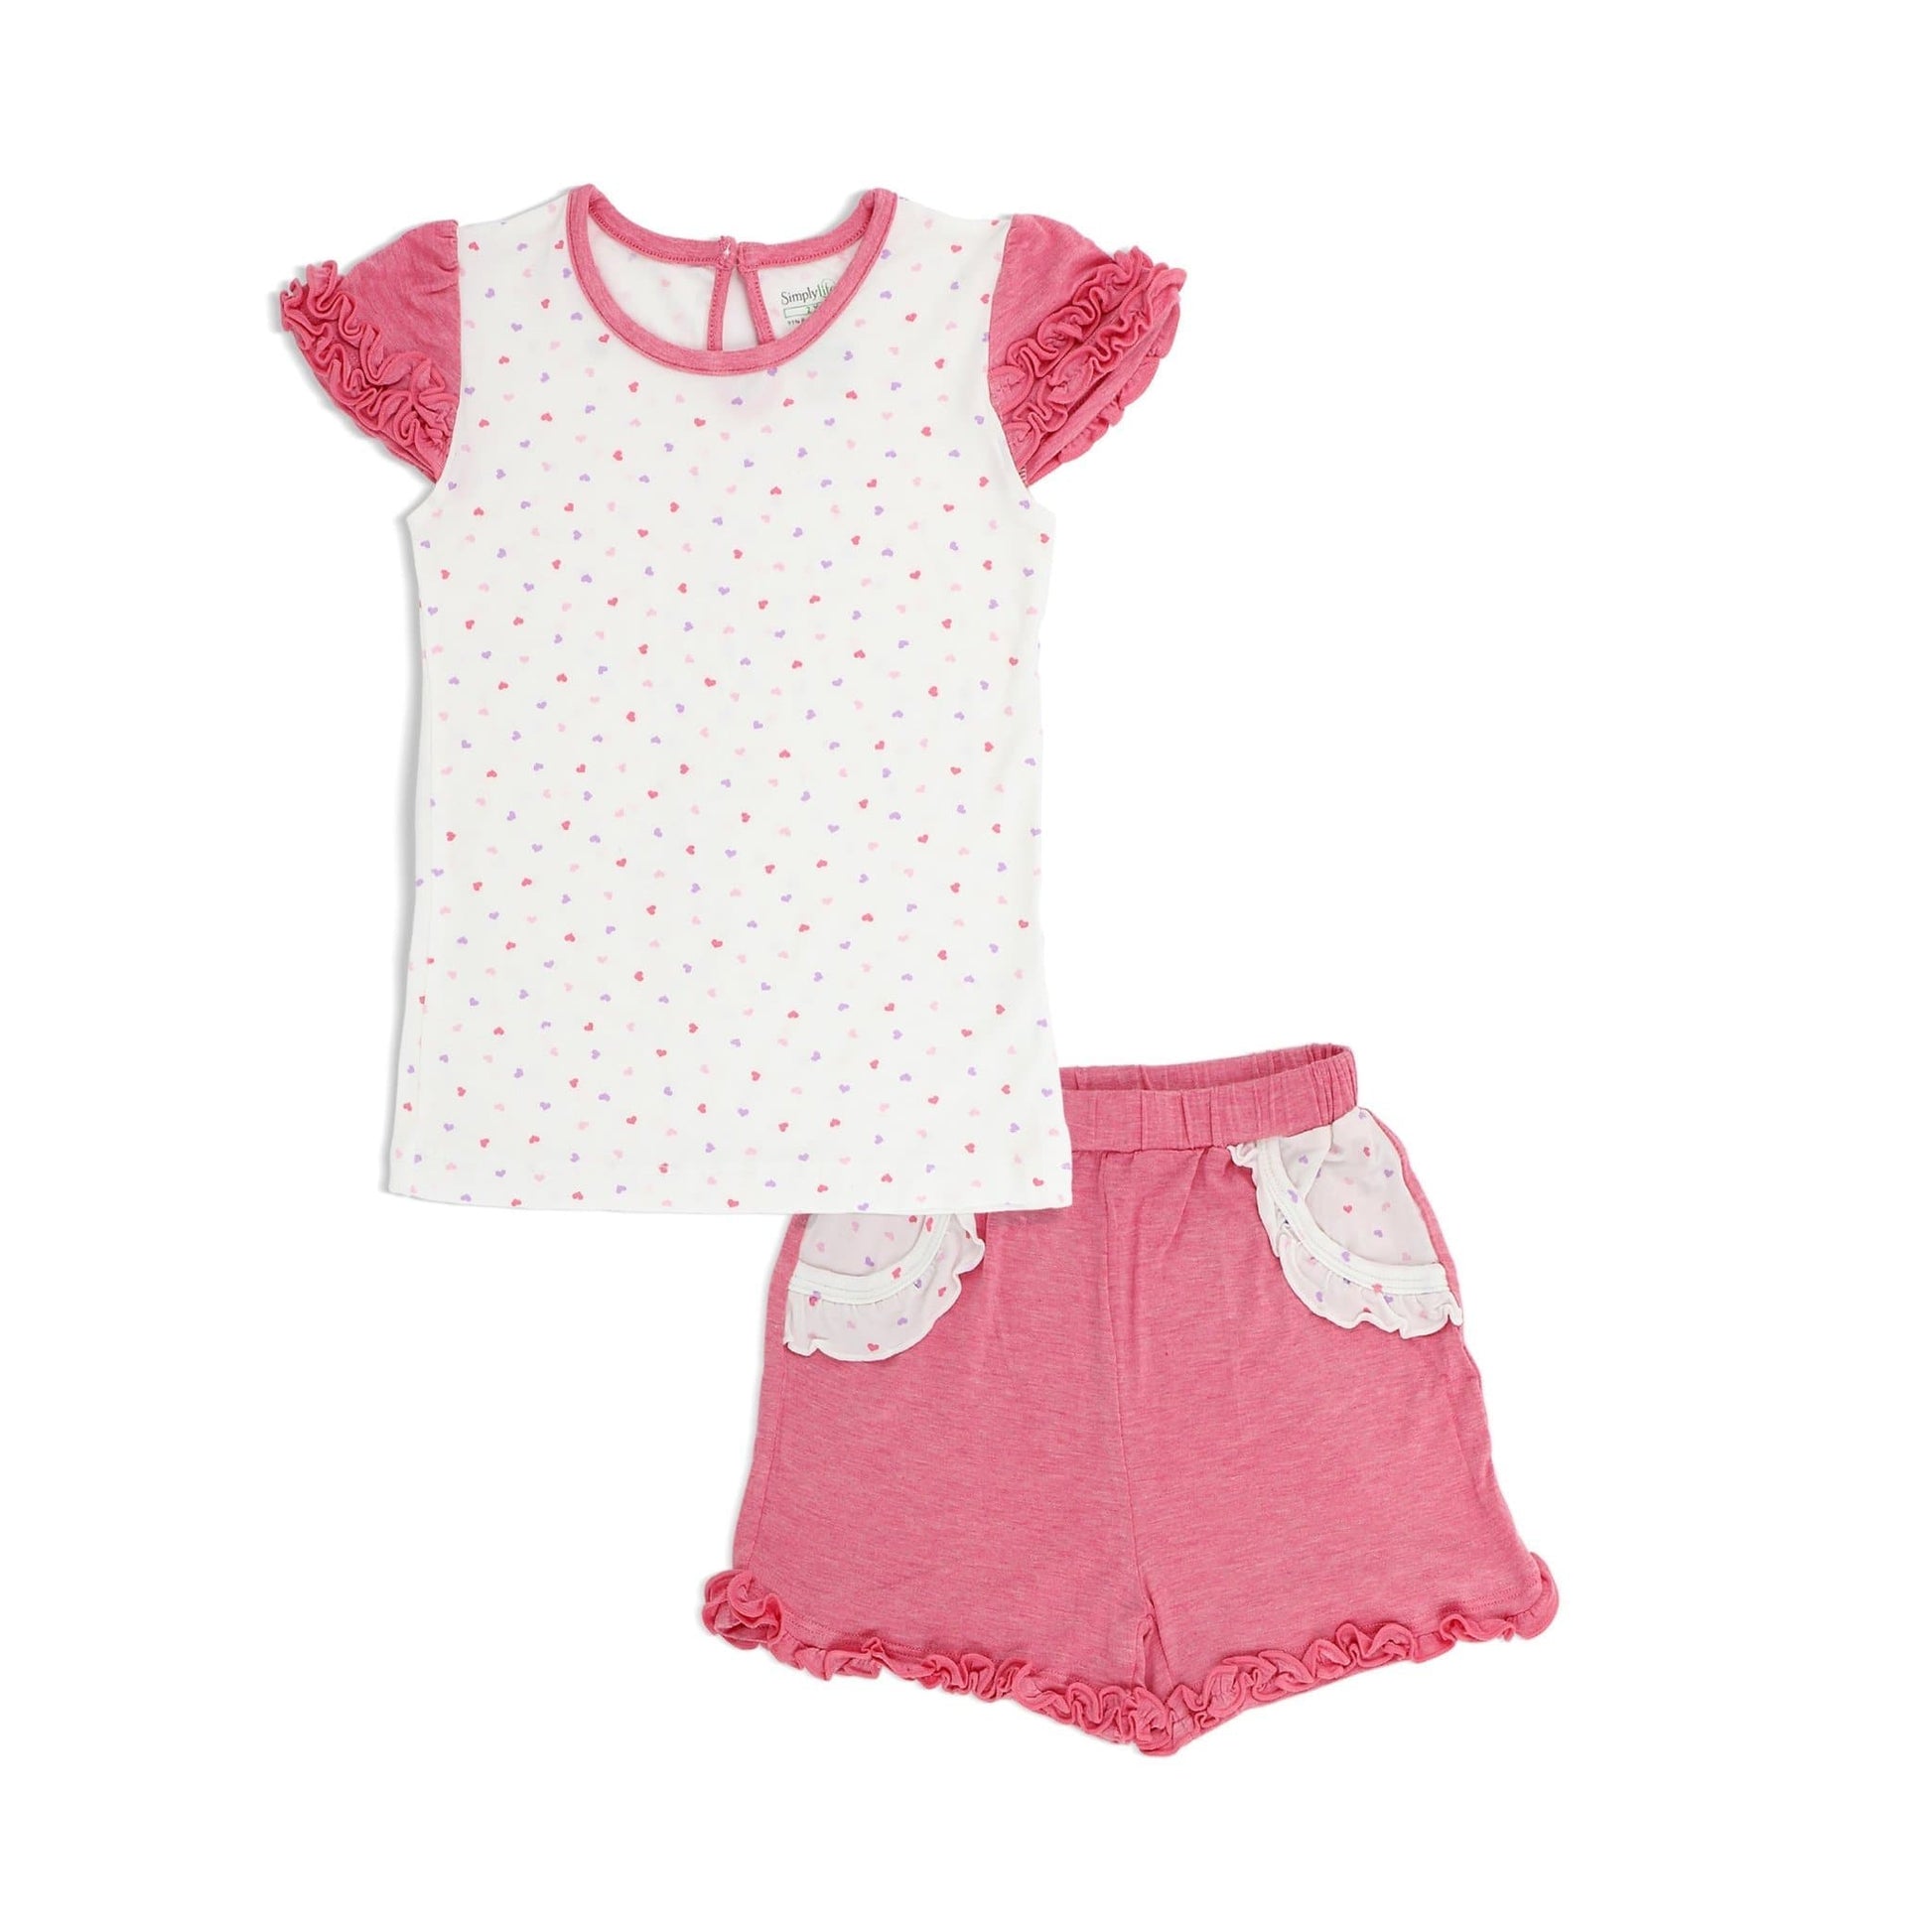 Hearts - Short-sleeved Tee with Ruffles & Shorts with Frills (mocked pocket) Kids Set - Simply Life